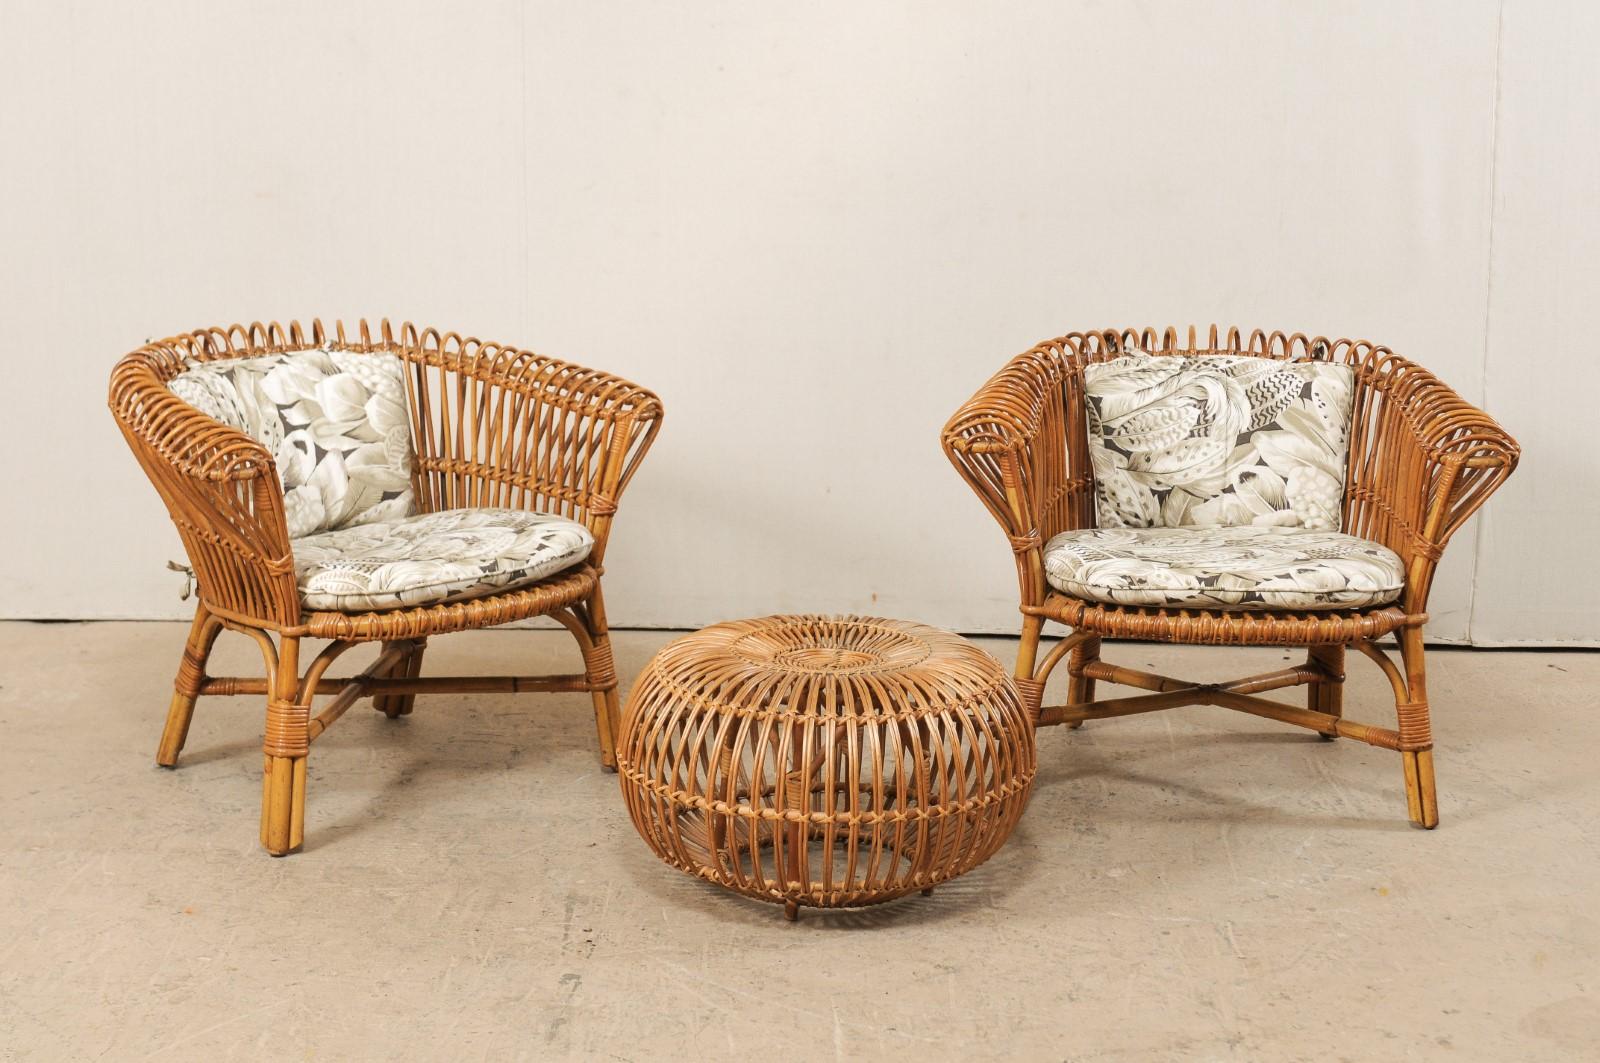 This vintage American patio set includes a pair of rattan chairs, with seat and back cushions, and single matching ottoman. This rattan seating arrangement was designed with casual comfort in mind. The two chairs feature bent rattan wrapped backs